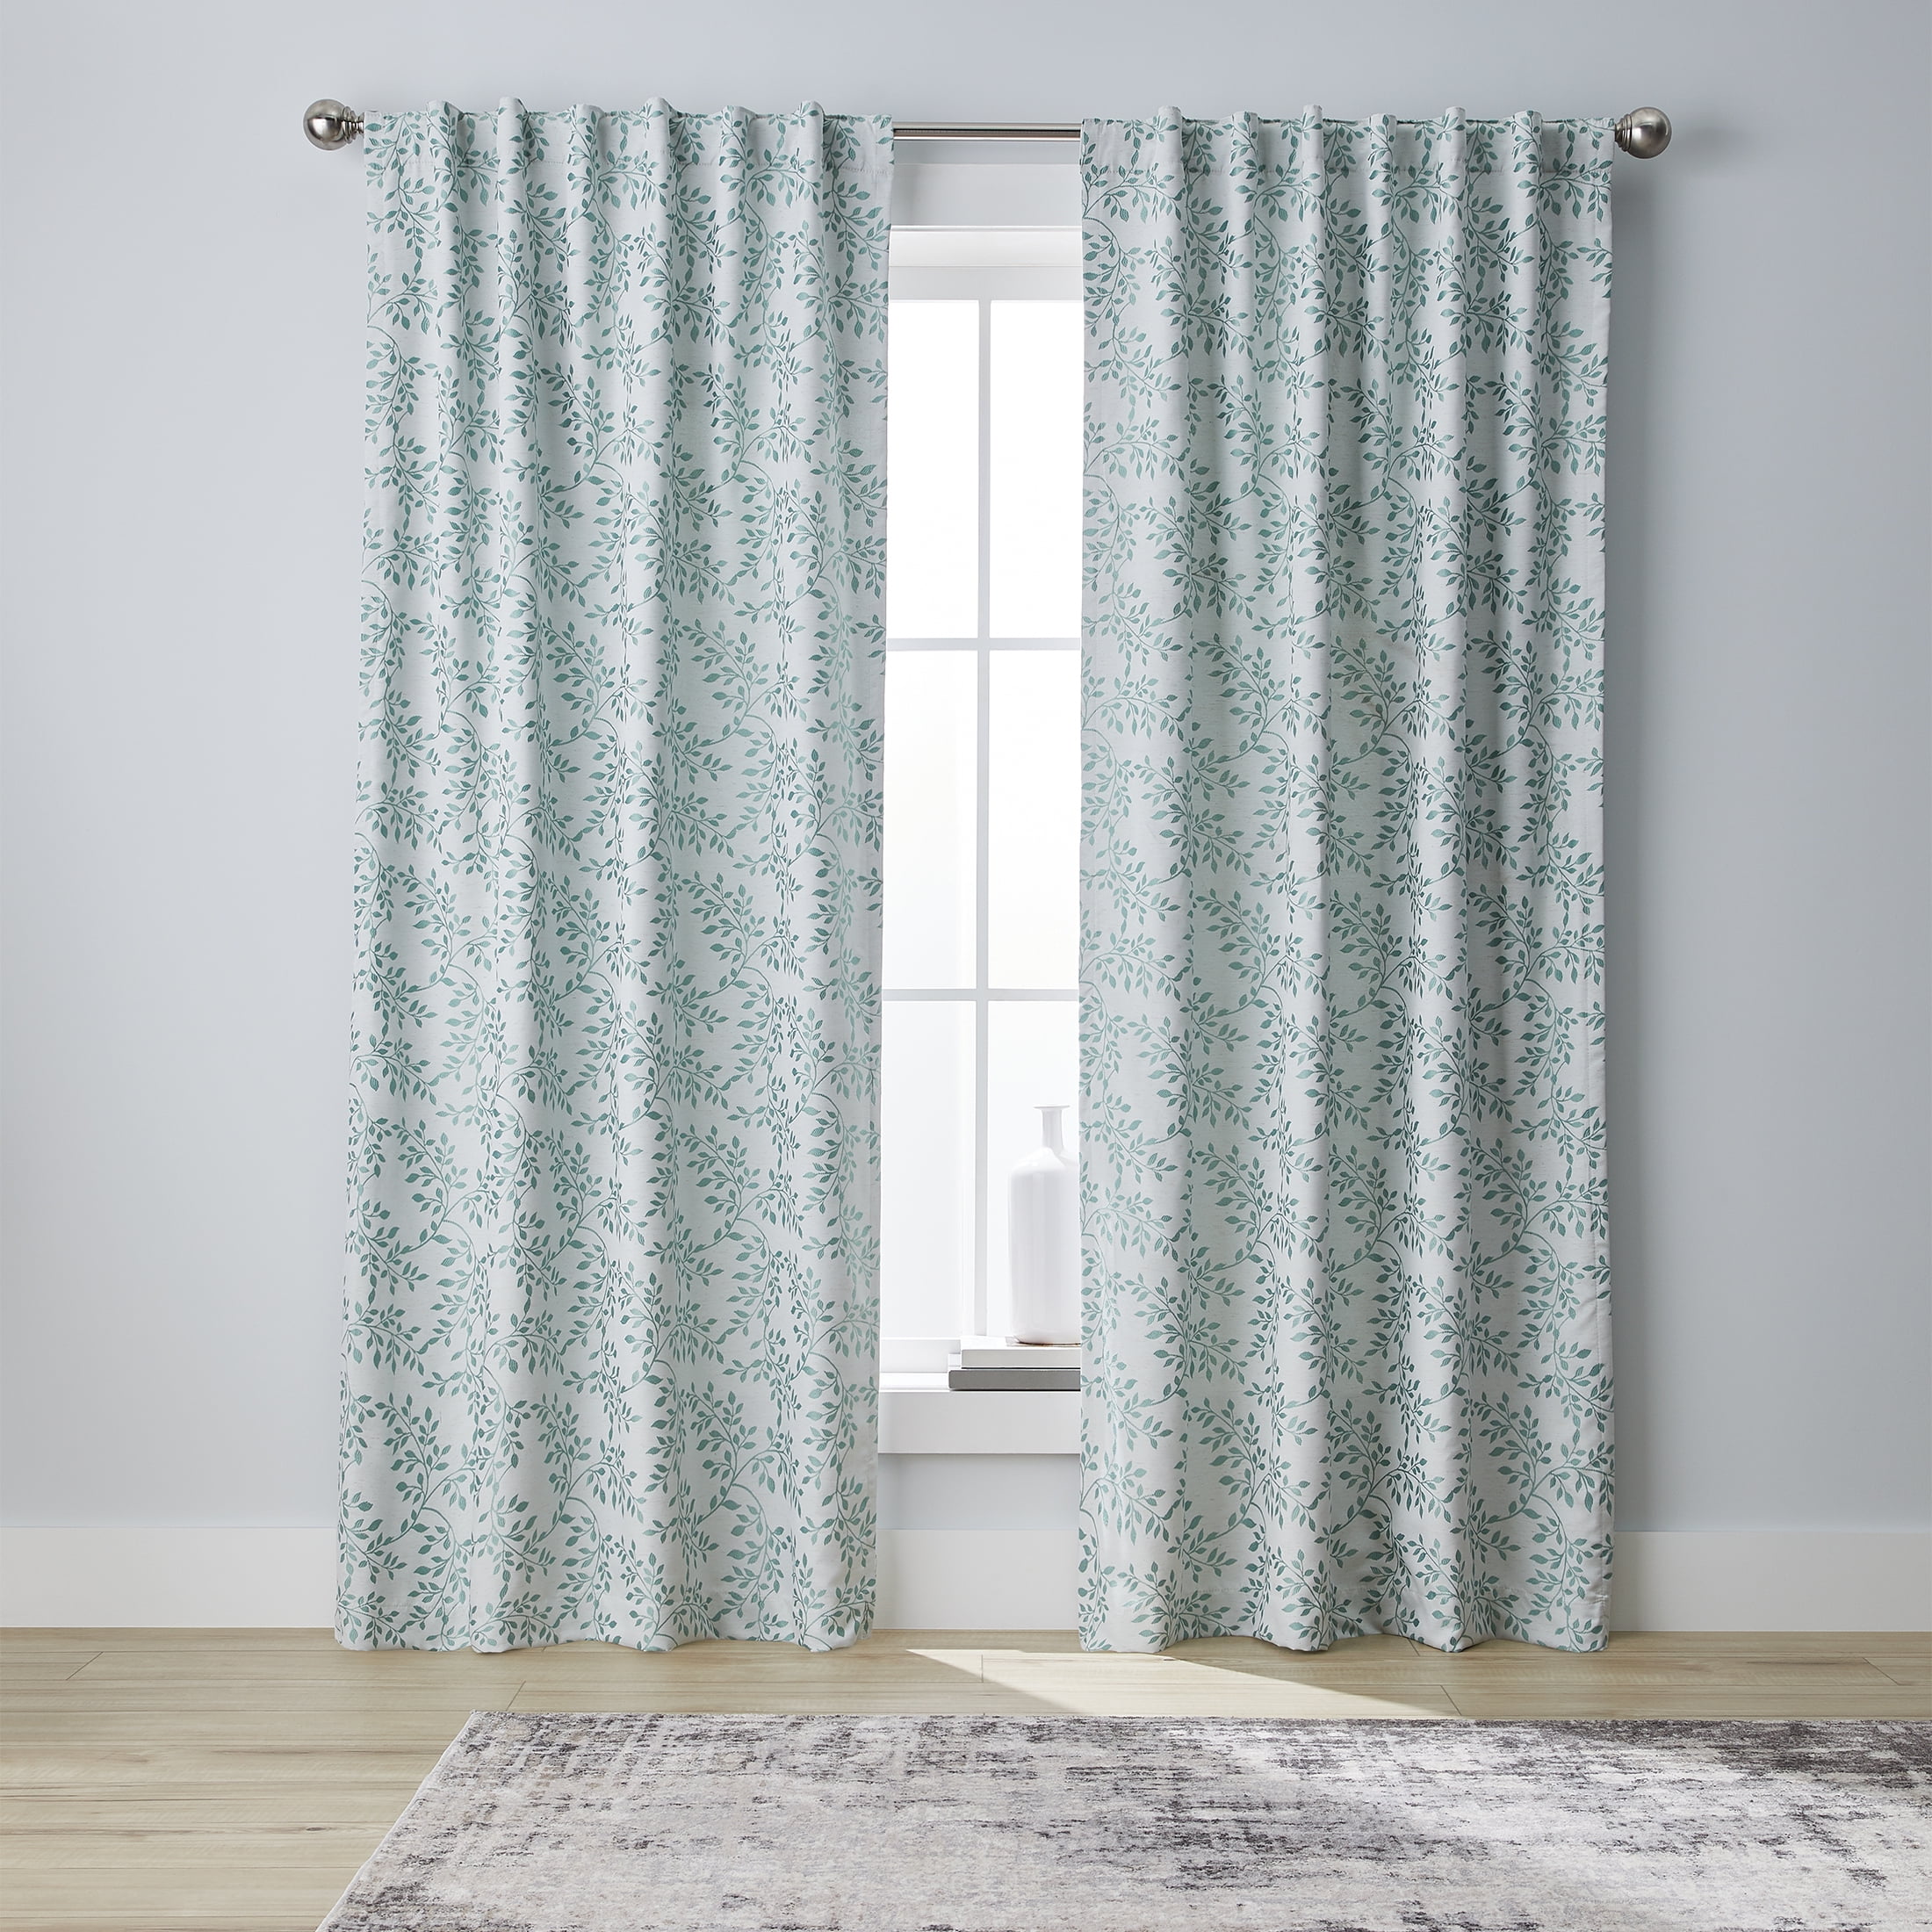 Sun Zero 40 X 84" 2-pack Arlo Textured Thermal Insulated Grommet Curtain Panels for sale online 